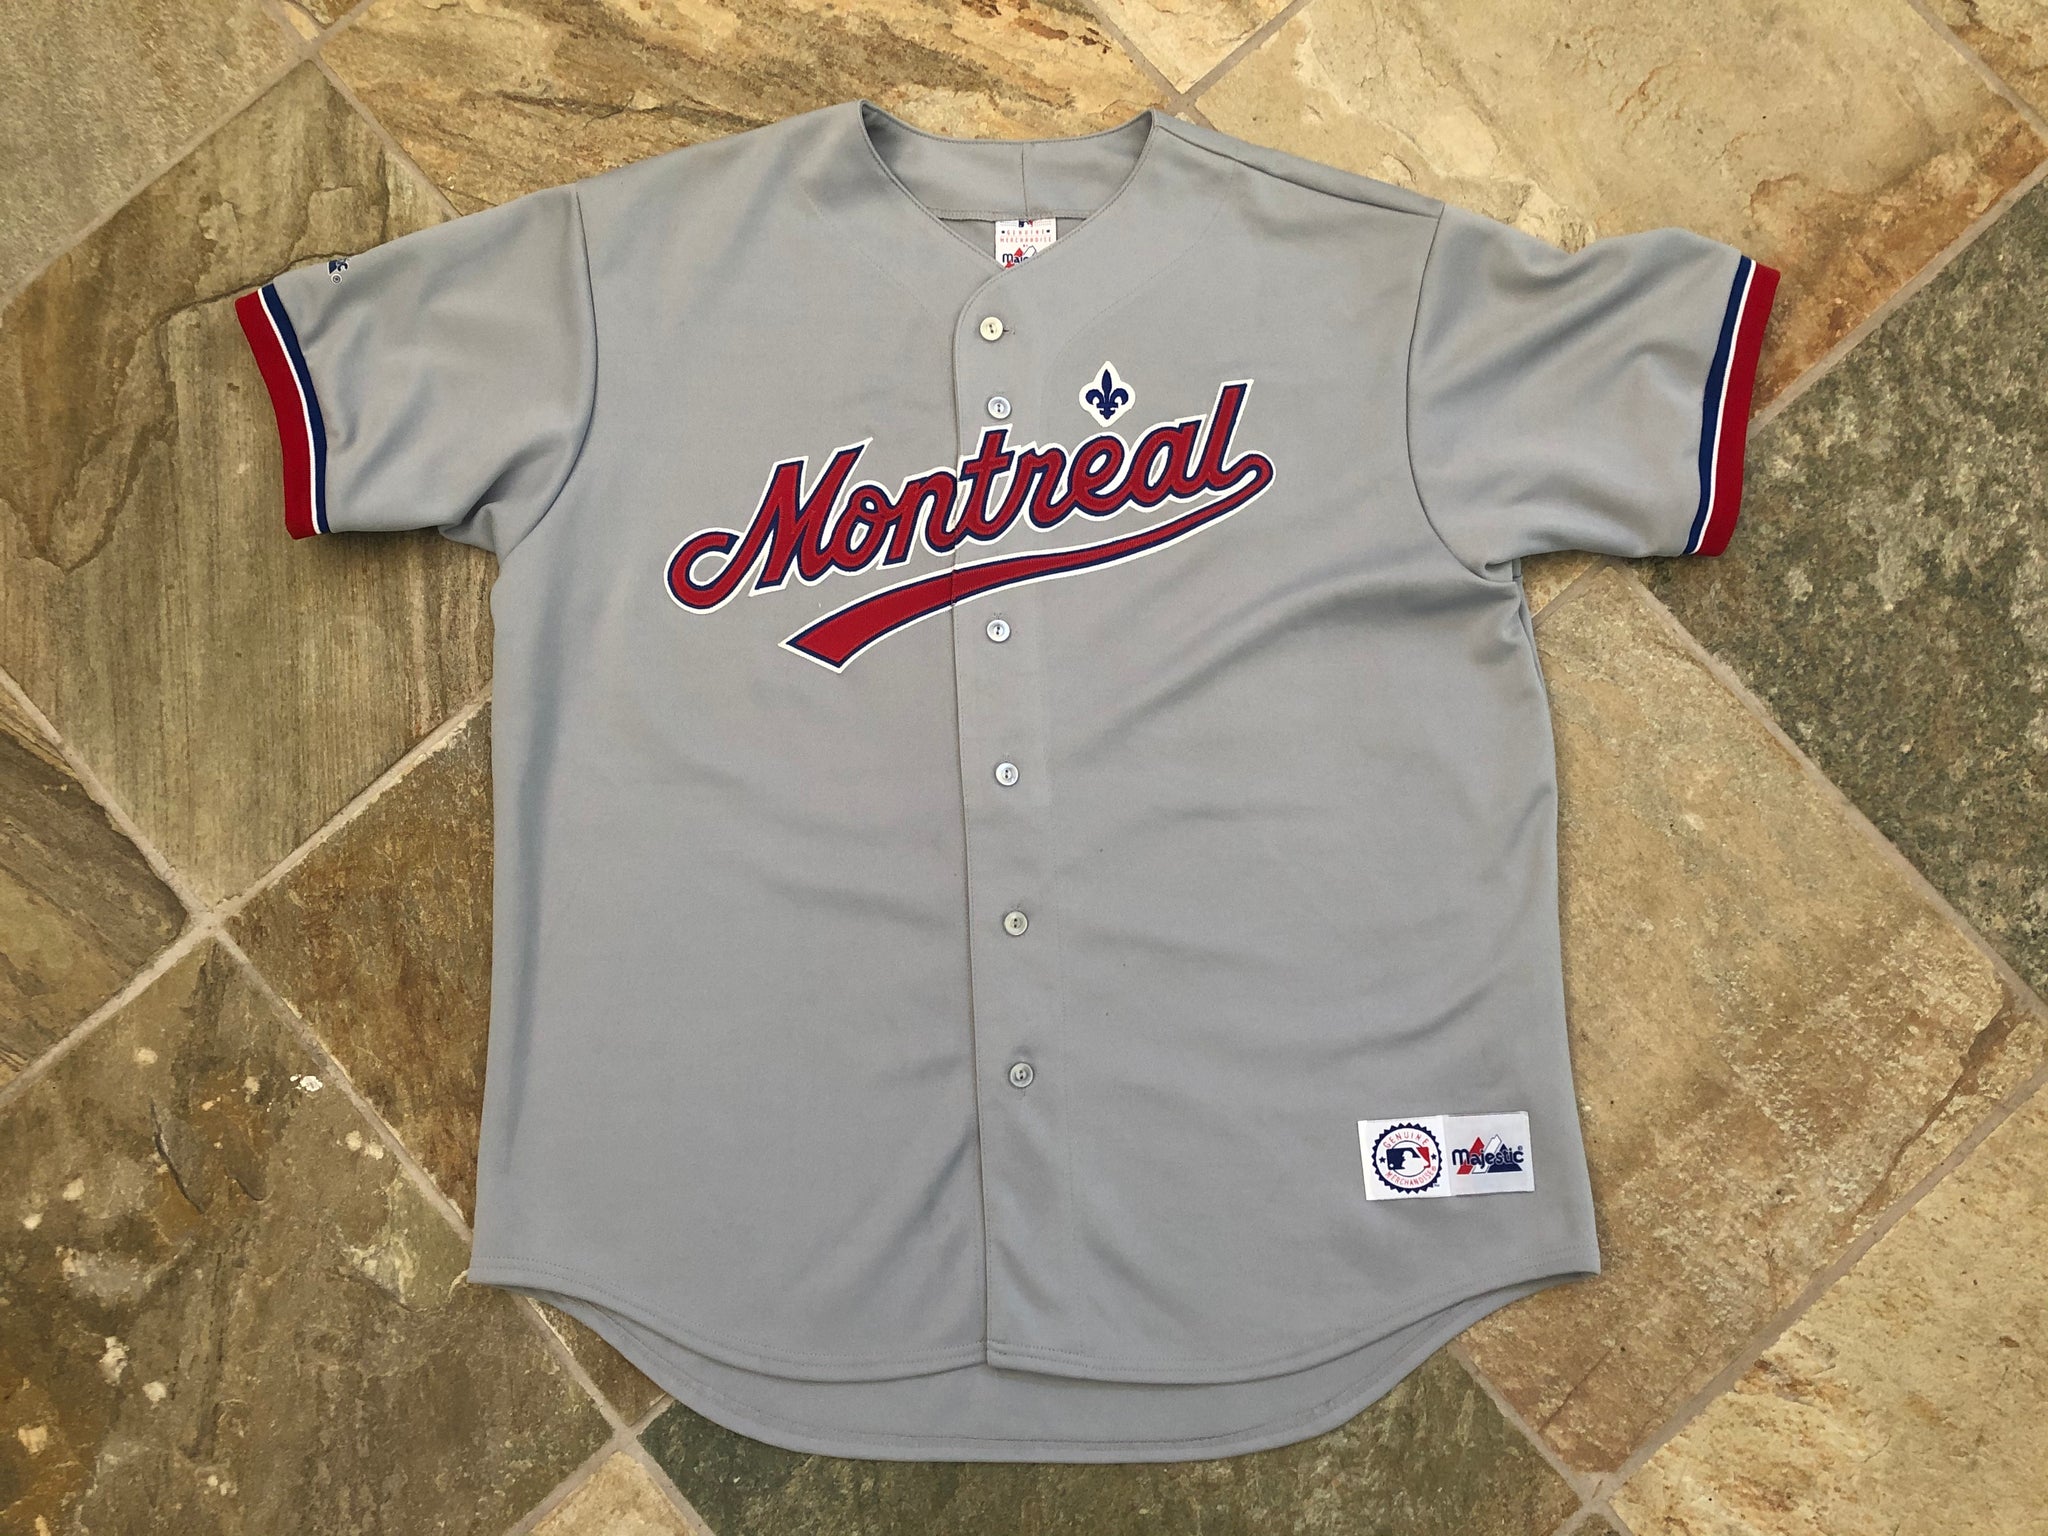 Vintage Montreal Expos Jersey